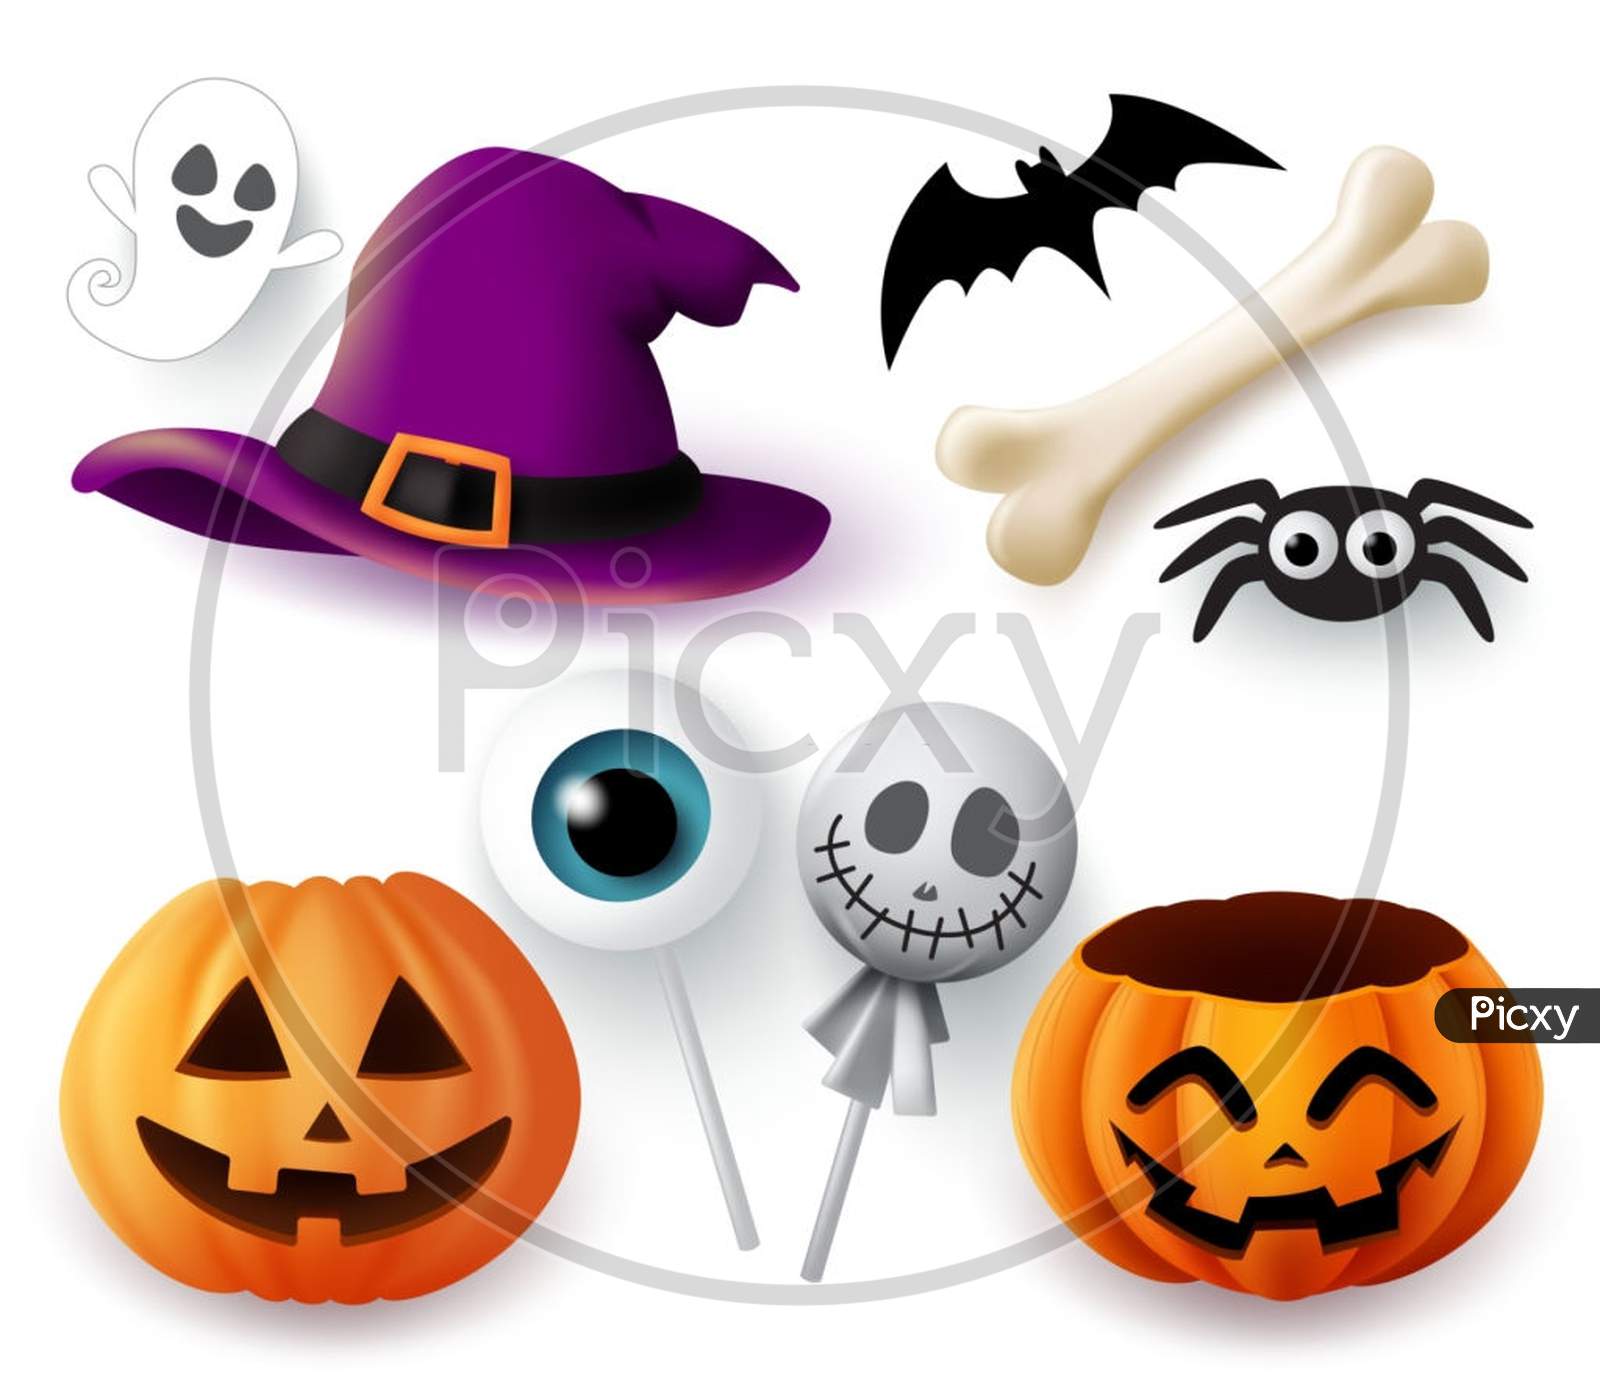 Halloween Objects Vector Set. Halloween Trick Or Treat Elements And Object Of Hat, Pumpkins, Spider, Bone, Bat, Ghost, And Eyeball Lollipop Isolated In White Background. Vector Illustration.